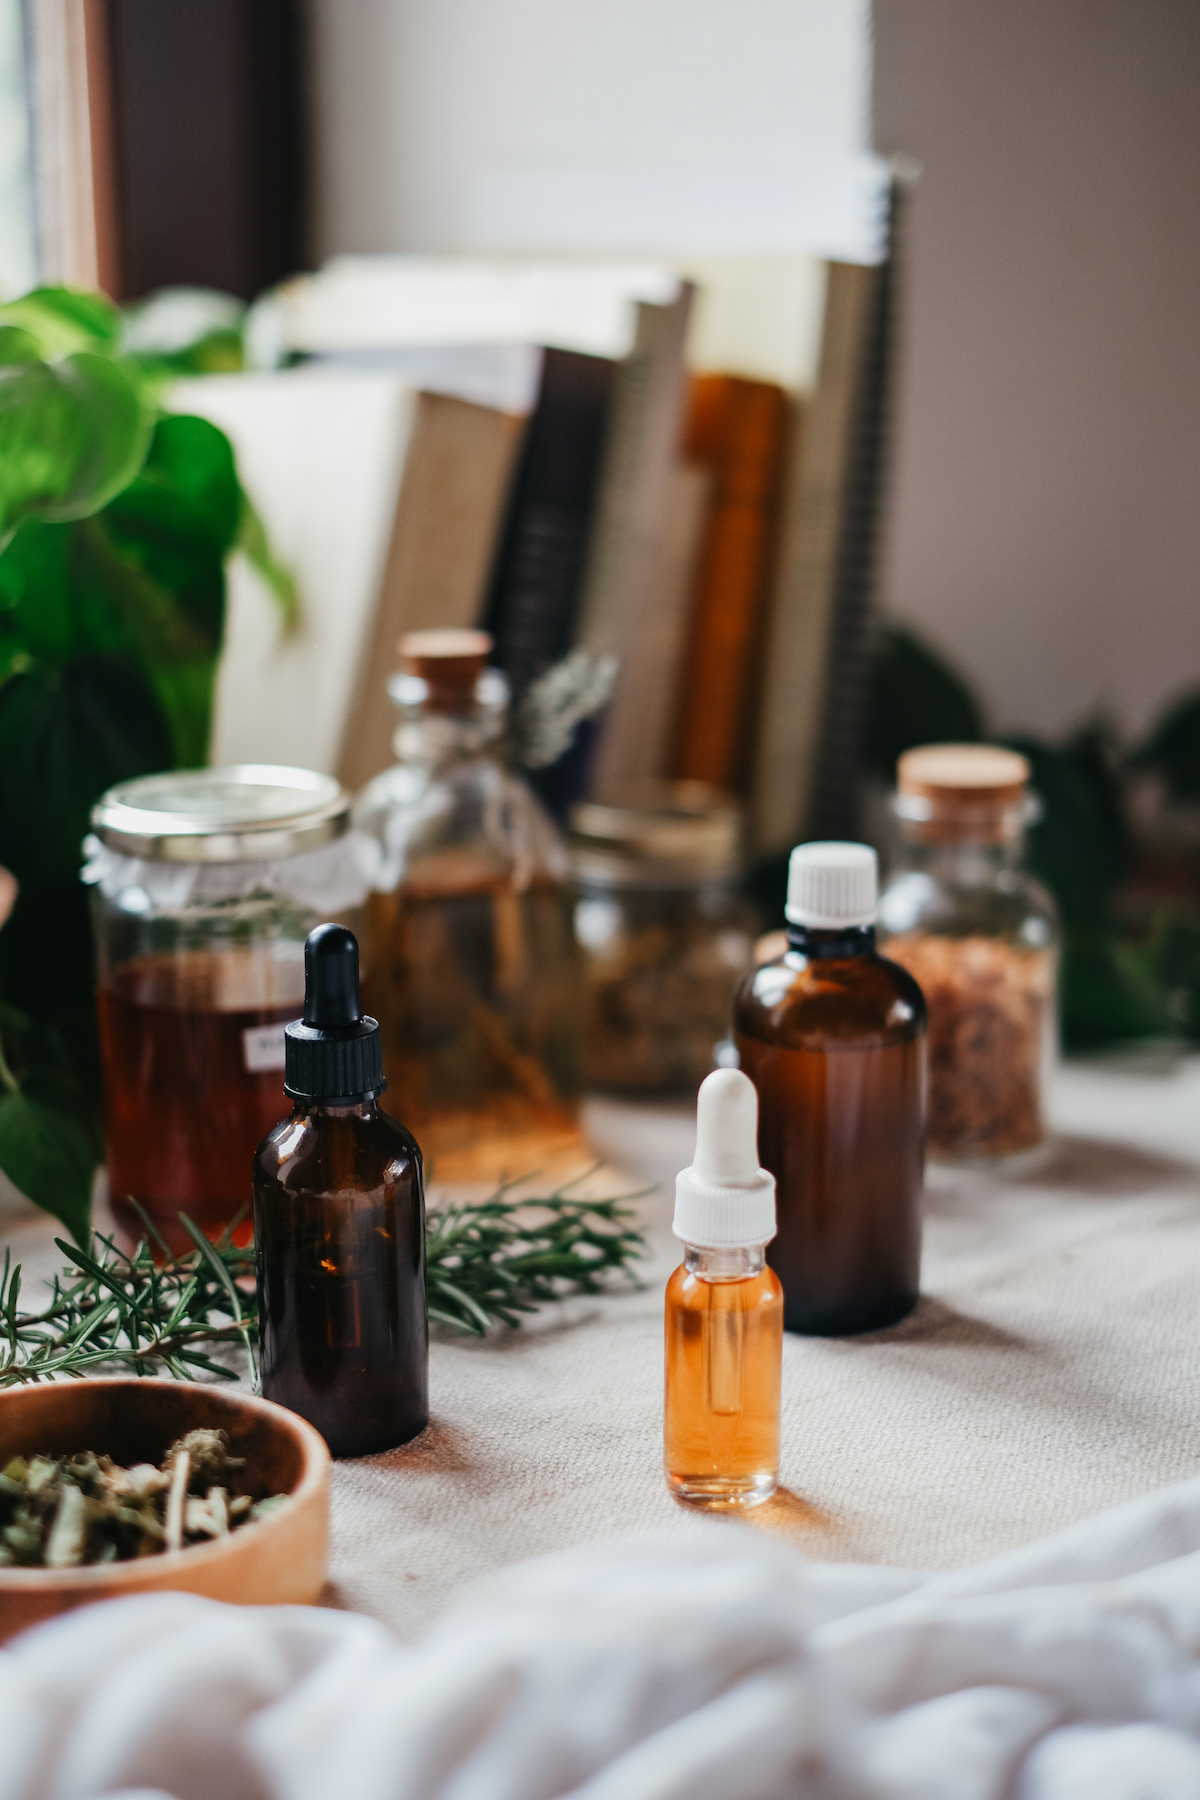 Tincture Making Course by Herbal Academy tinctures in store [to buy or diy]